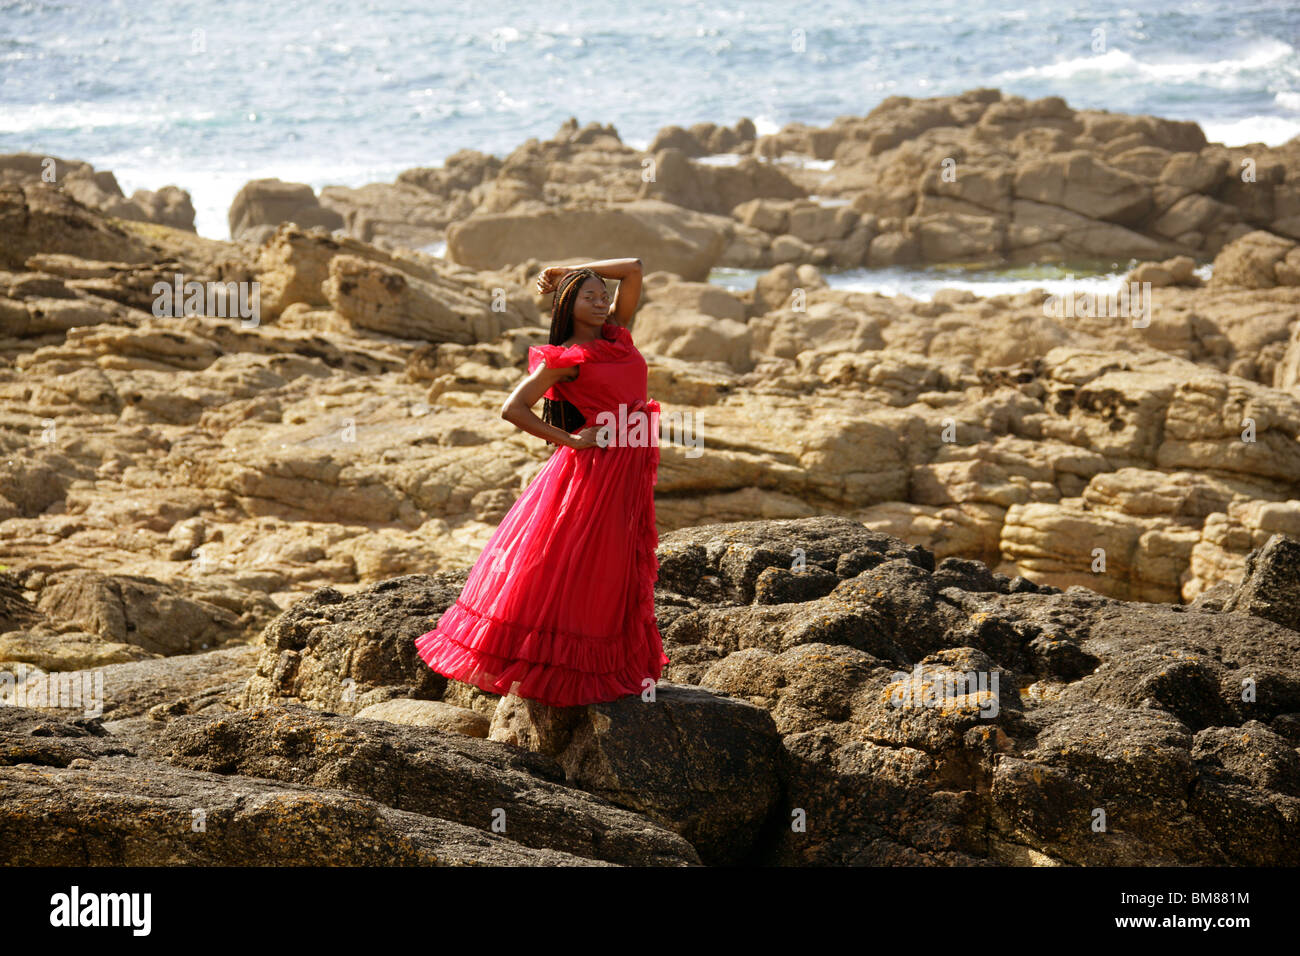 African Woman with Dreadlocks, Wearing a Red Dress, Standing on Rocks by the Sea. Stock Photo